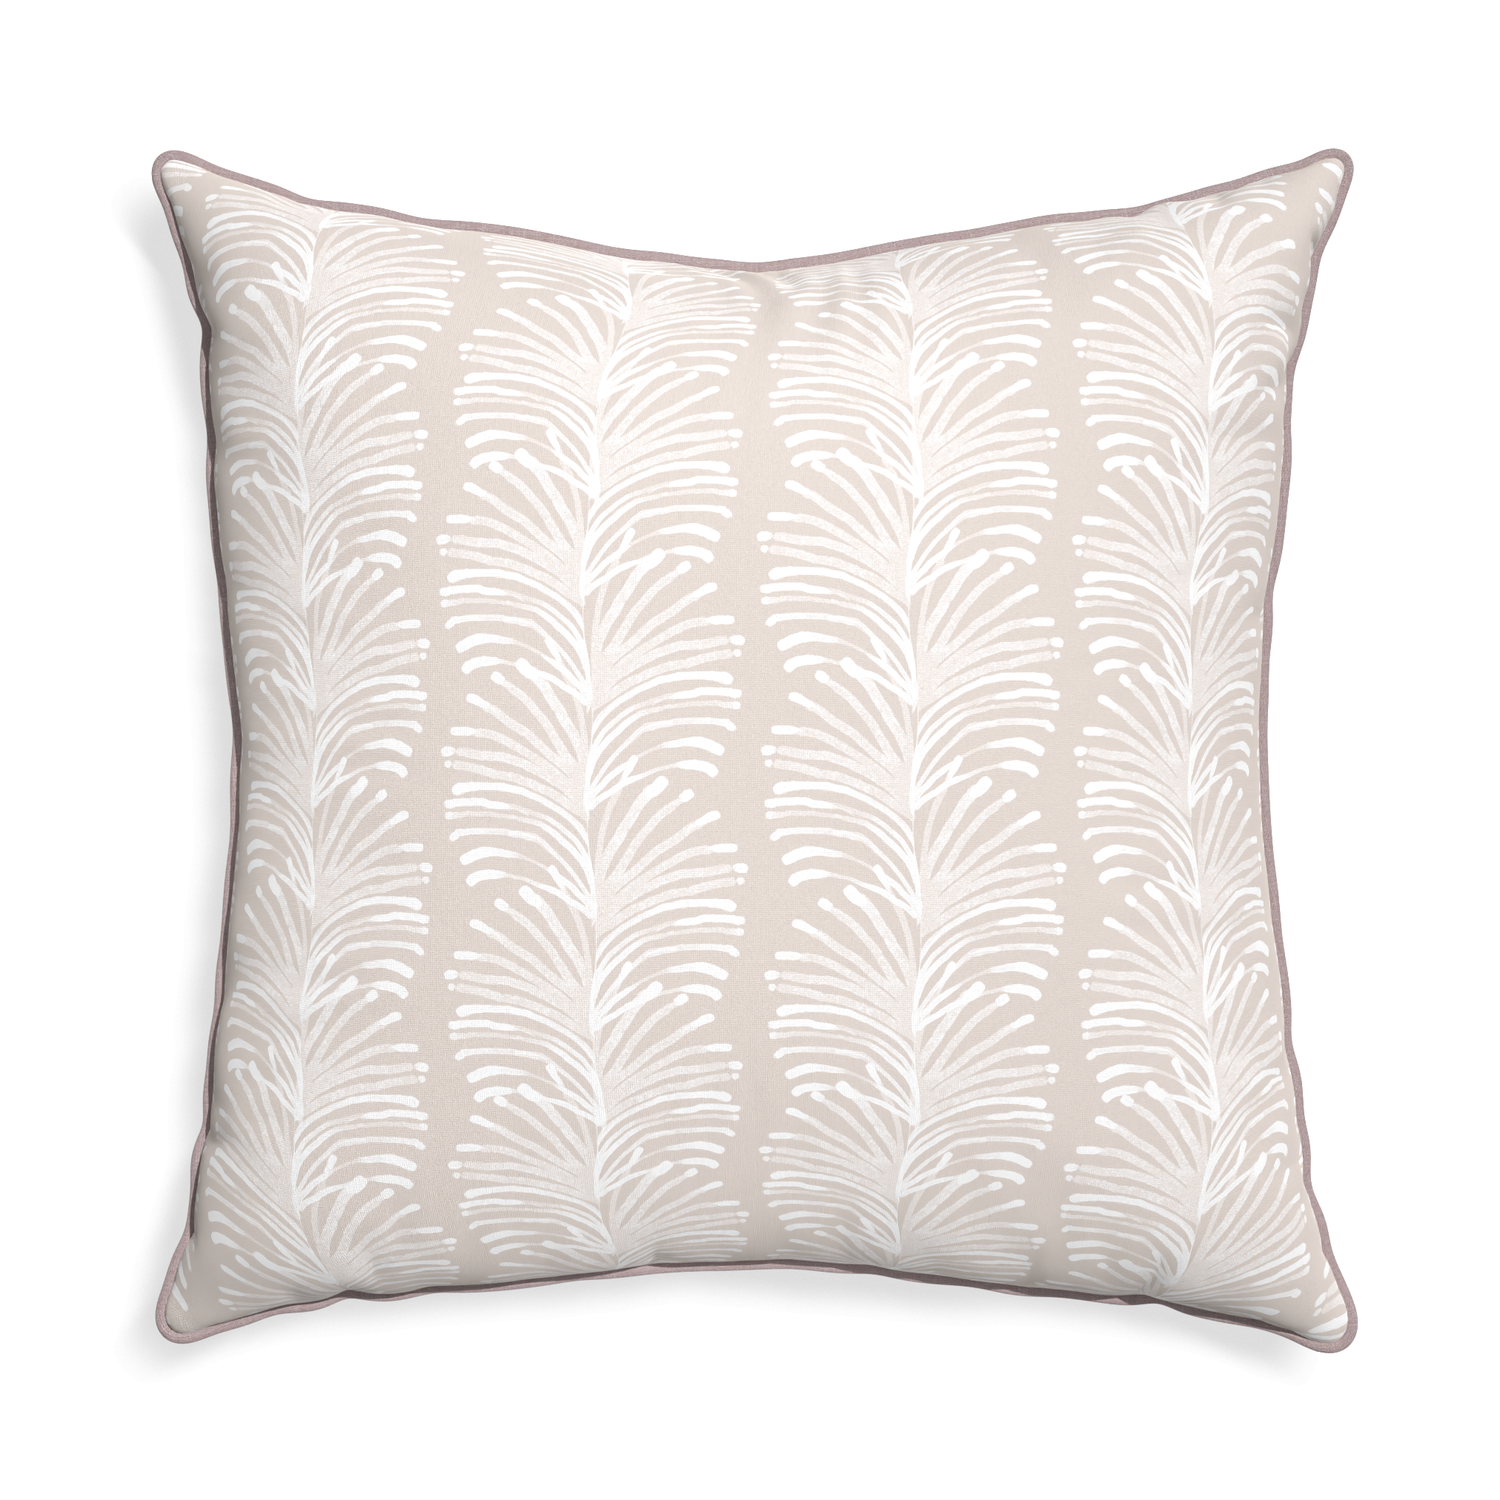 Euro-sham emma sand custom sand colored botanical stripepillow with orchid piping on white background